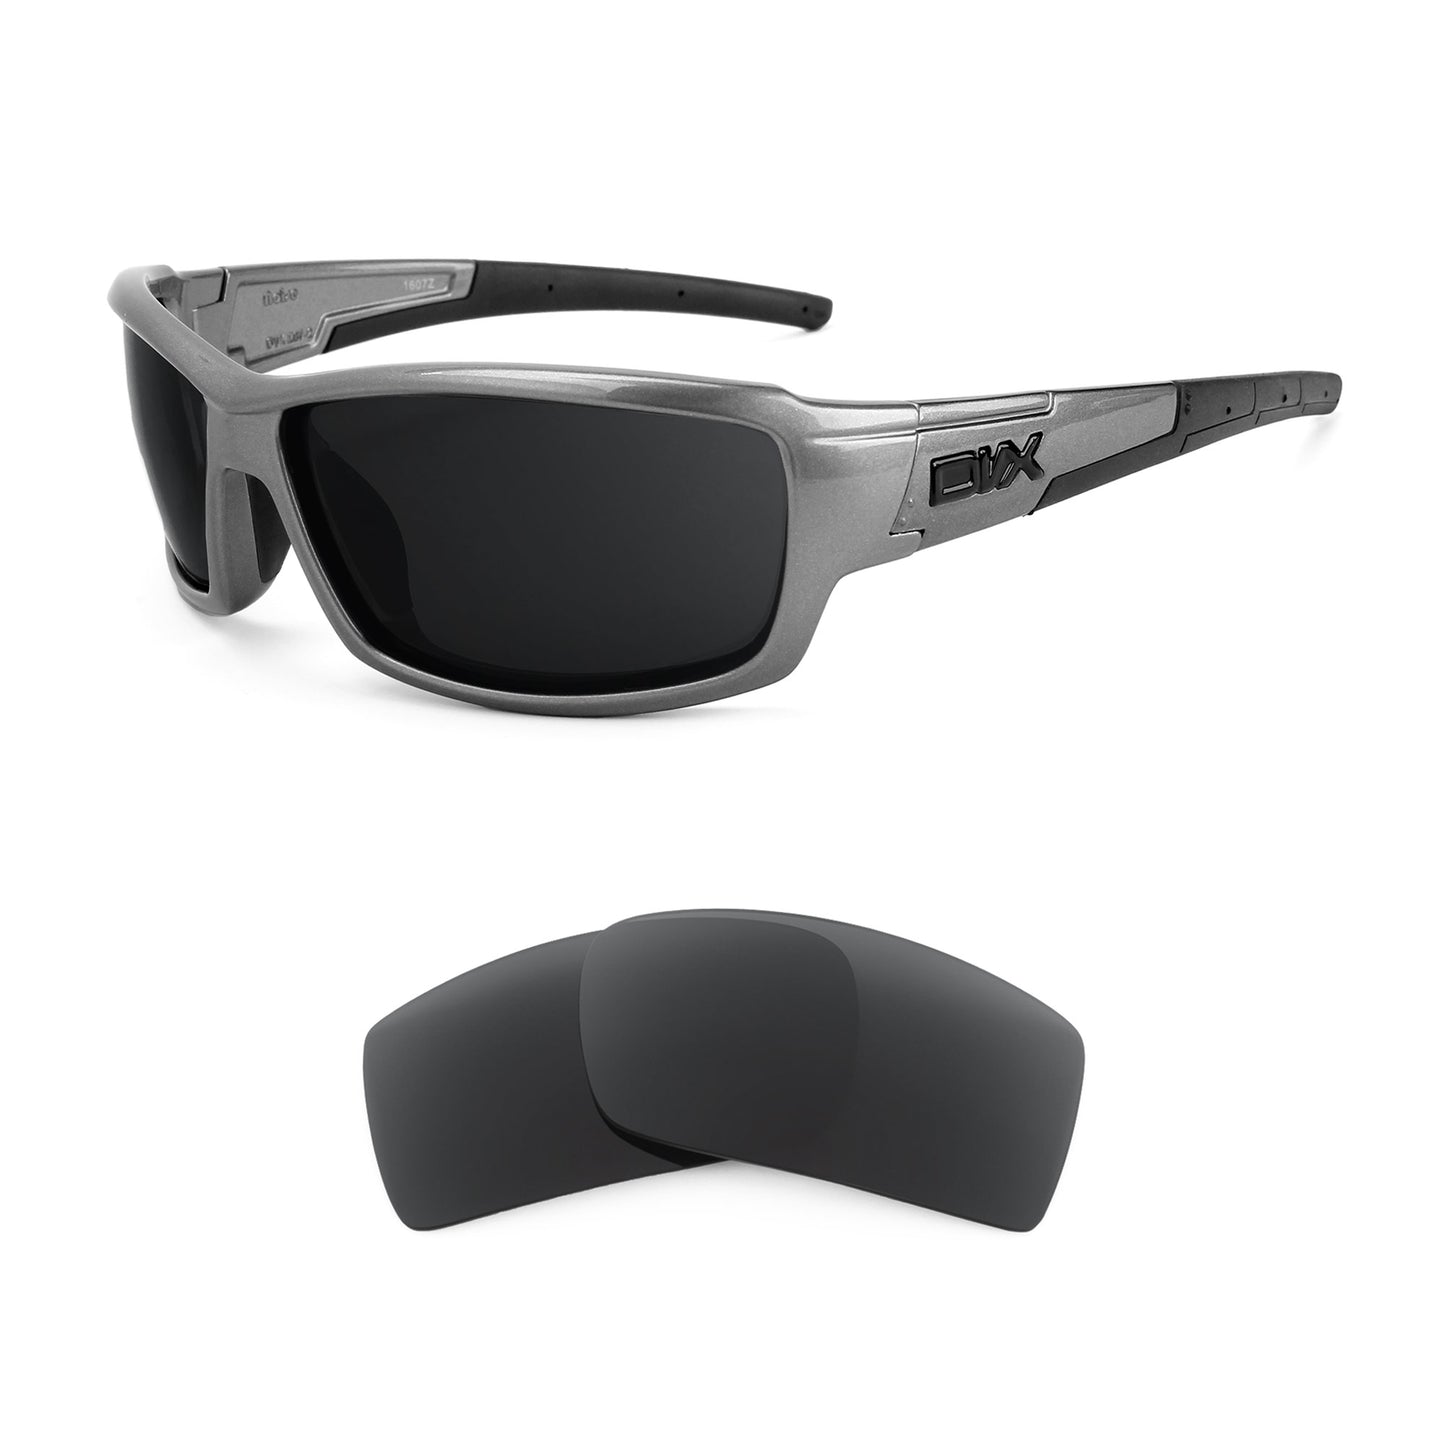 DVX Eyewear Noise sunglasses with replacement lenses